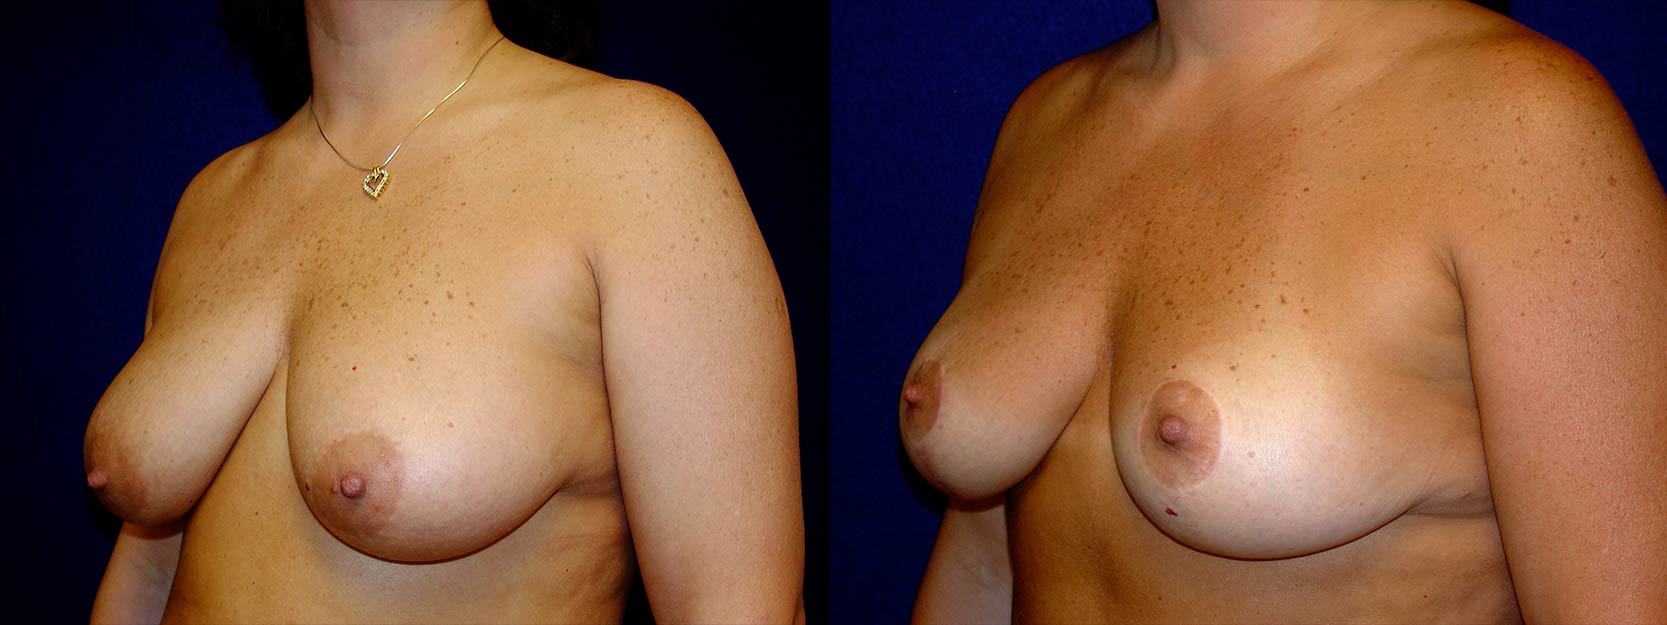 Left 3/4 View - Breast Lift